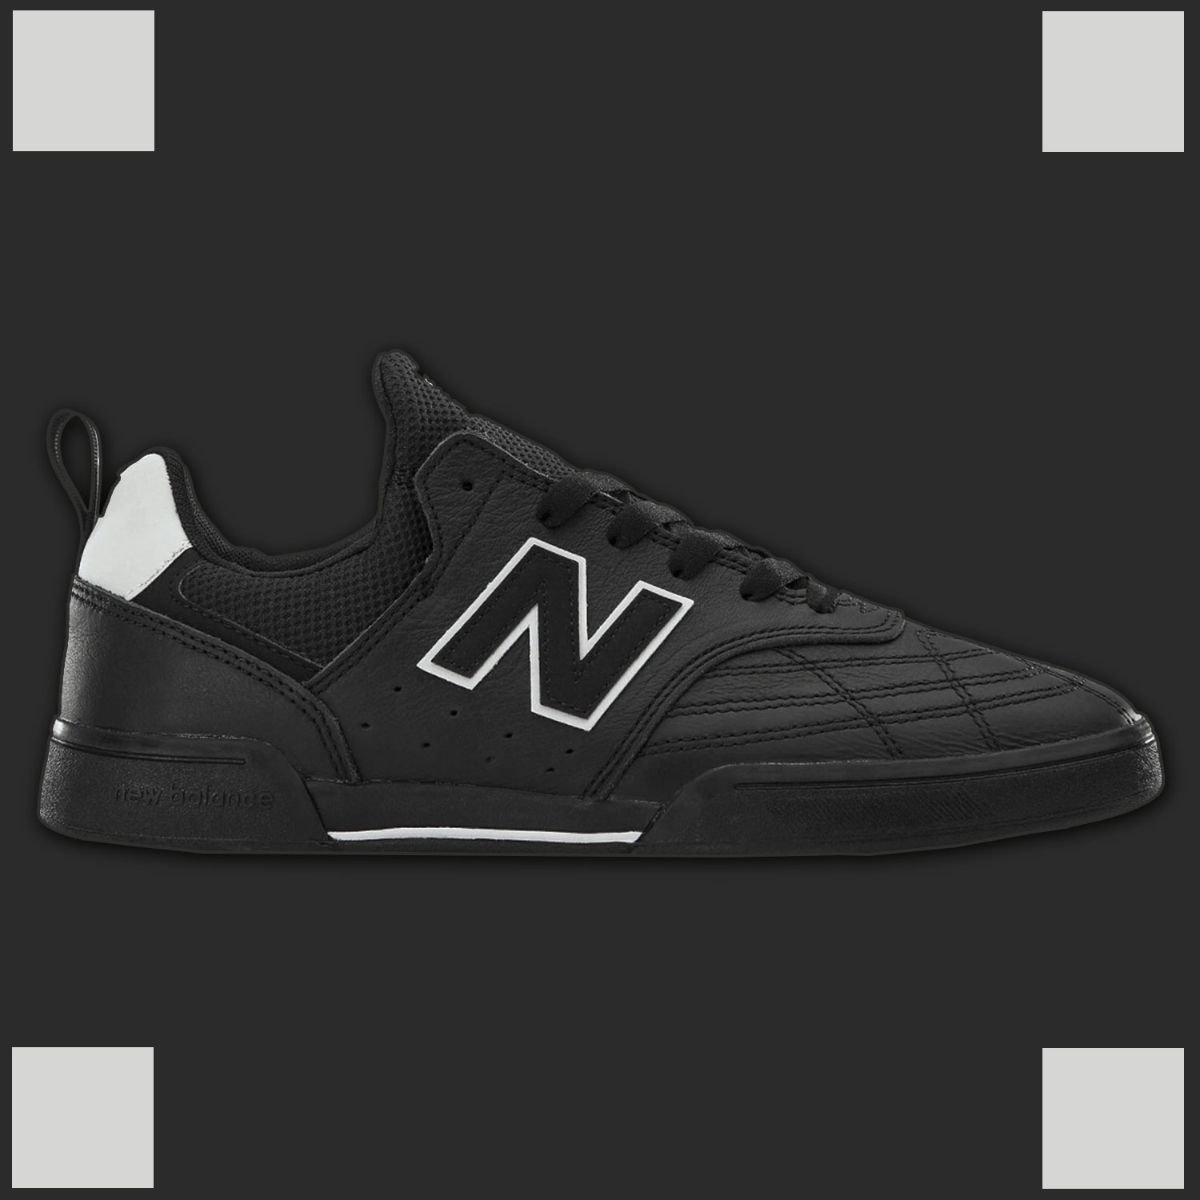 Just added more New Balance Numeric